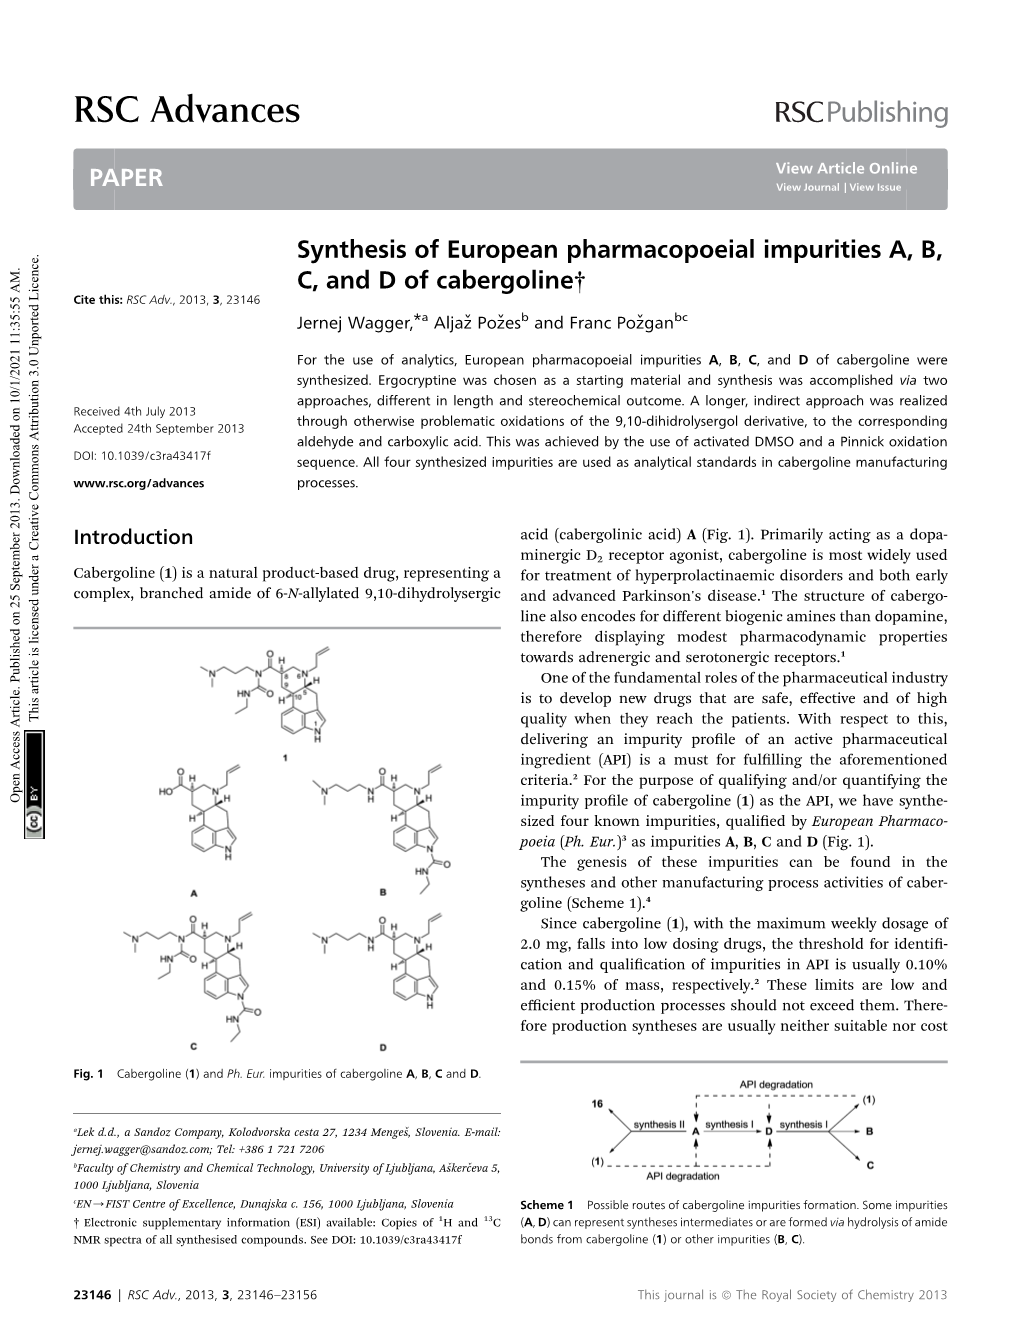 Synthesis of European Pharmacopoeial Impurities A, B, C, and D of Cabergoline† Cite This: RSC Adv., 2013, 3, 23146 Jernej Wagger,*A Aljaˇzpoˇzesb and Franc Poˇzganbc